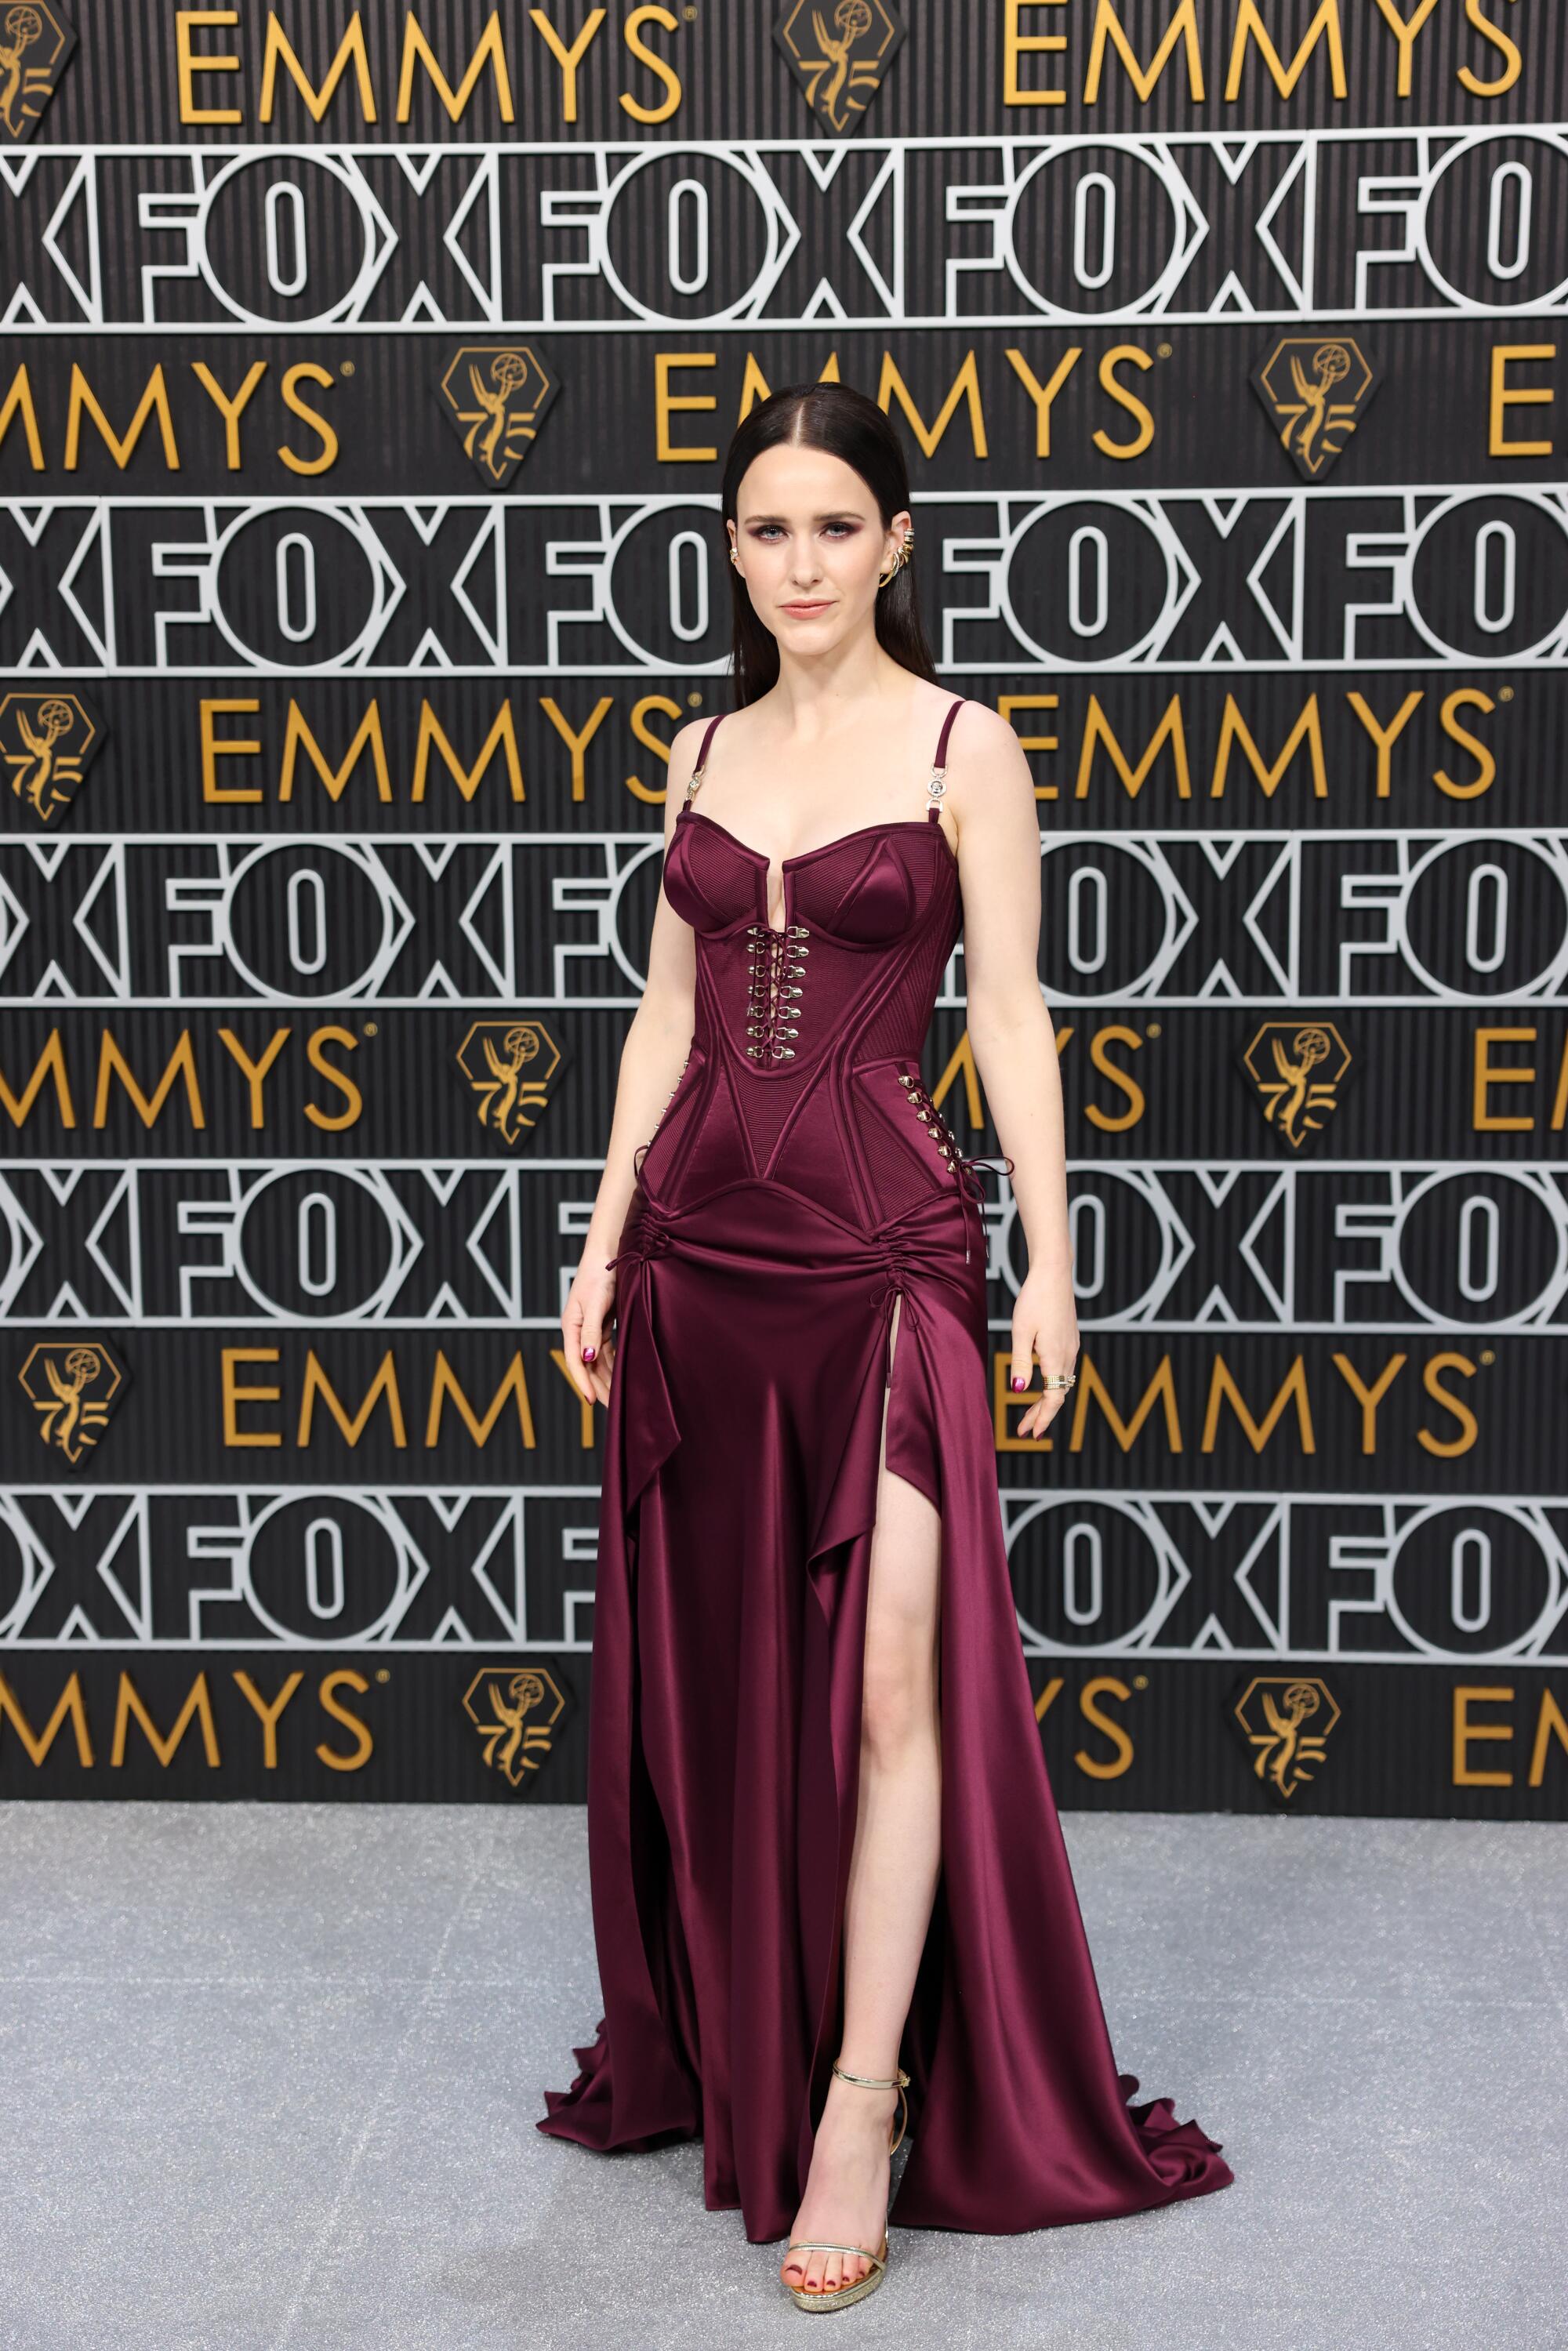 Rachel Brosnahan wears a plum-colored dress on the Emmys red carpet.  